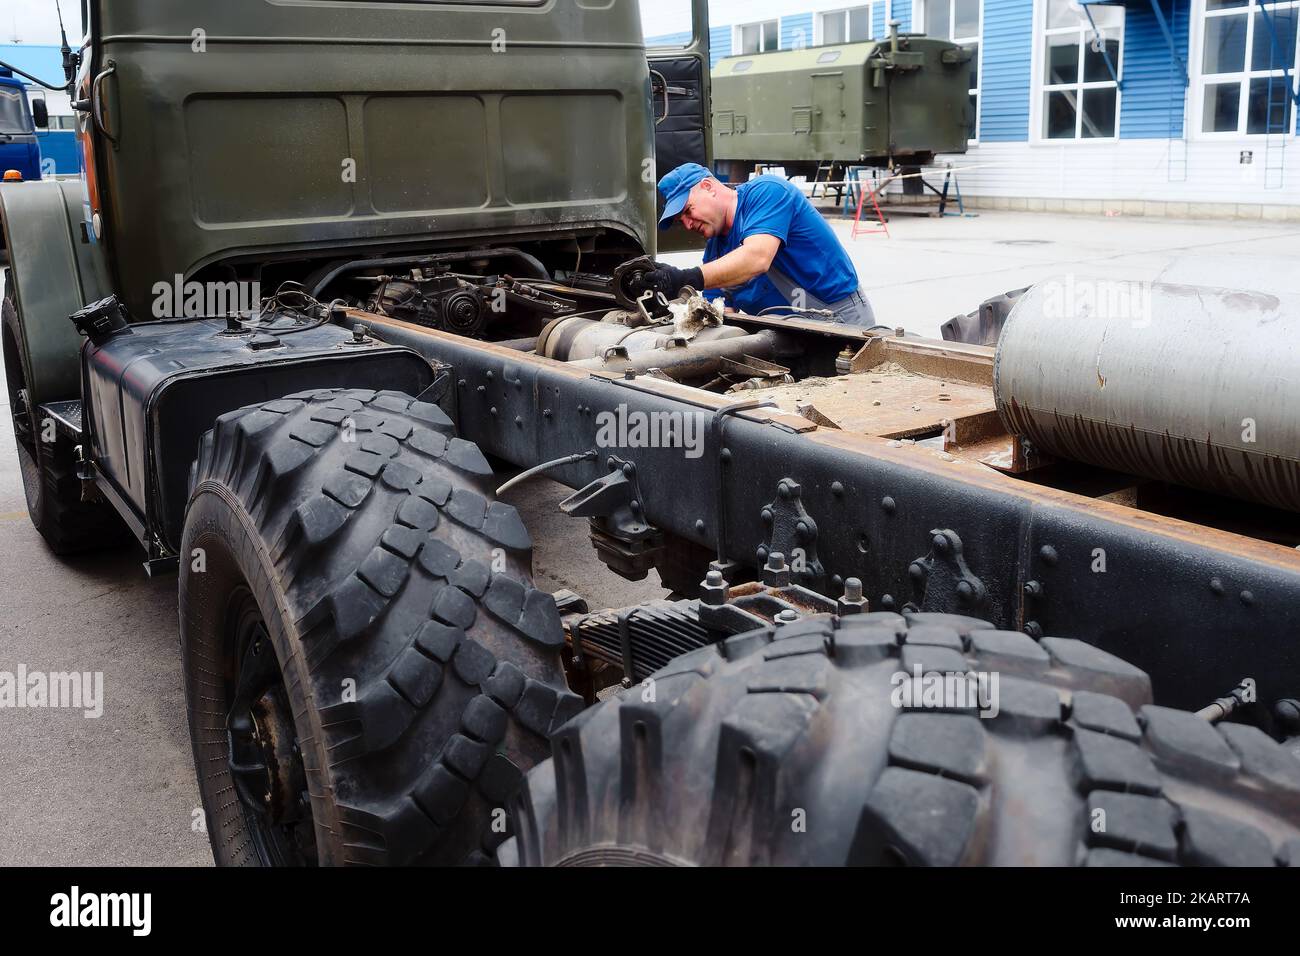 Mechanic in overalls repairs truck on summer day outside. Urgent repair of trucks. Authentic workflow.. Stock Photo